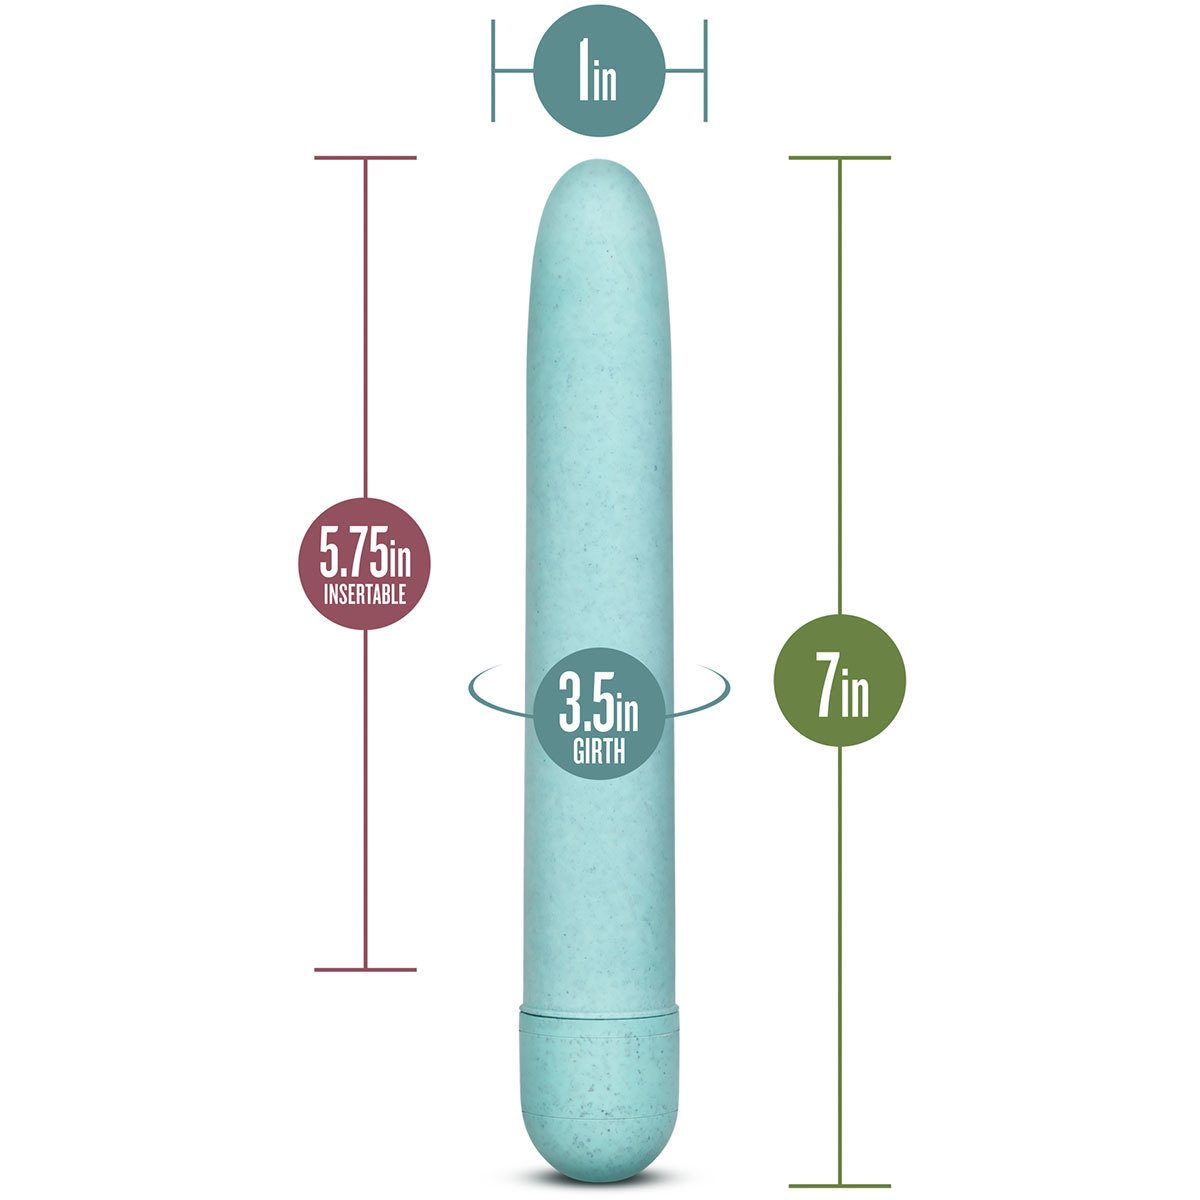 The Blush Novelties Gaia Eco vibrator is a dainty 7" long and 1" wide, with a turn dial